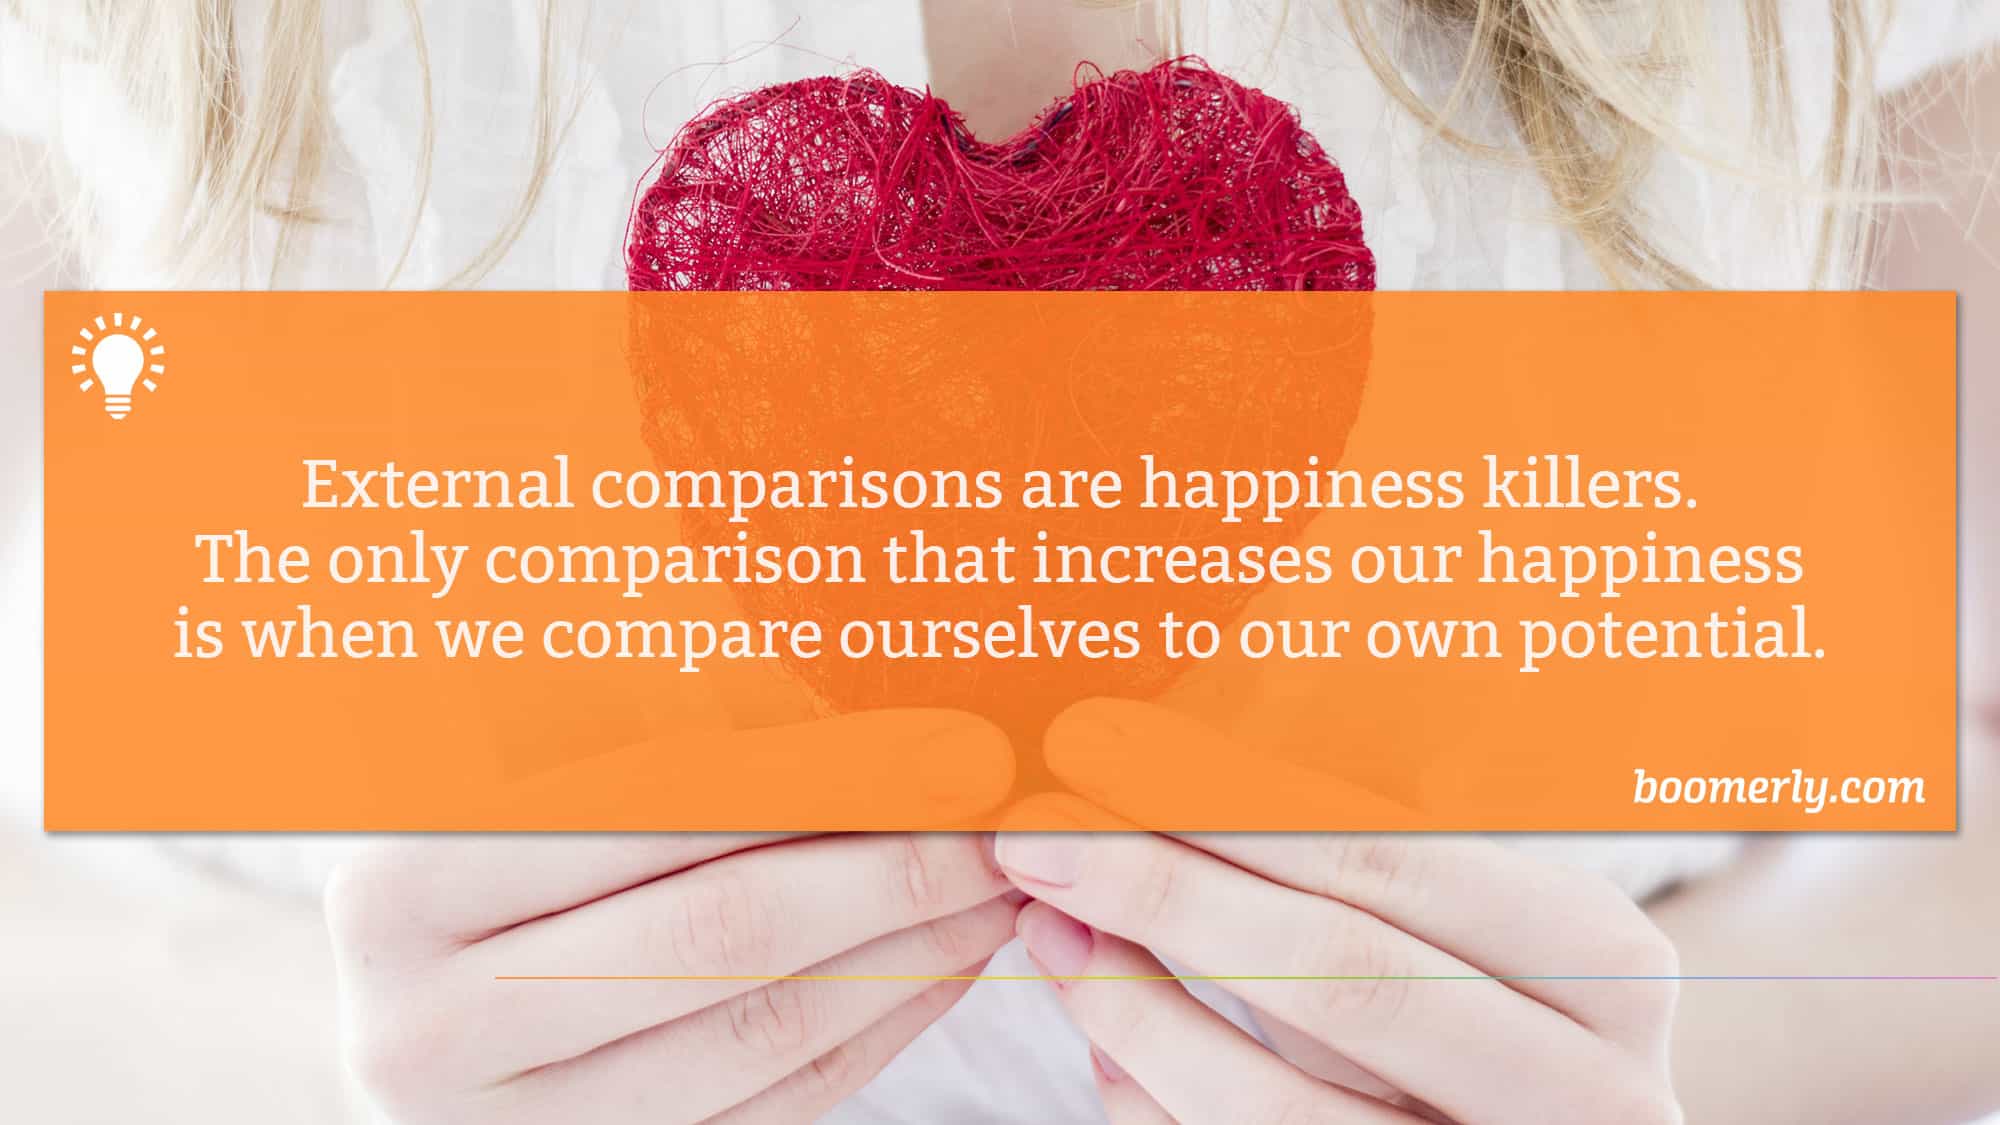 External comparisons are happiness killers. The only comparison that increases our happiness is when we compare ourselves to our own potential.